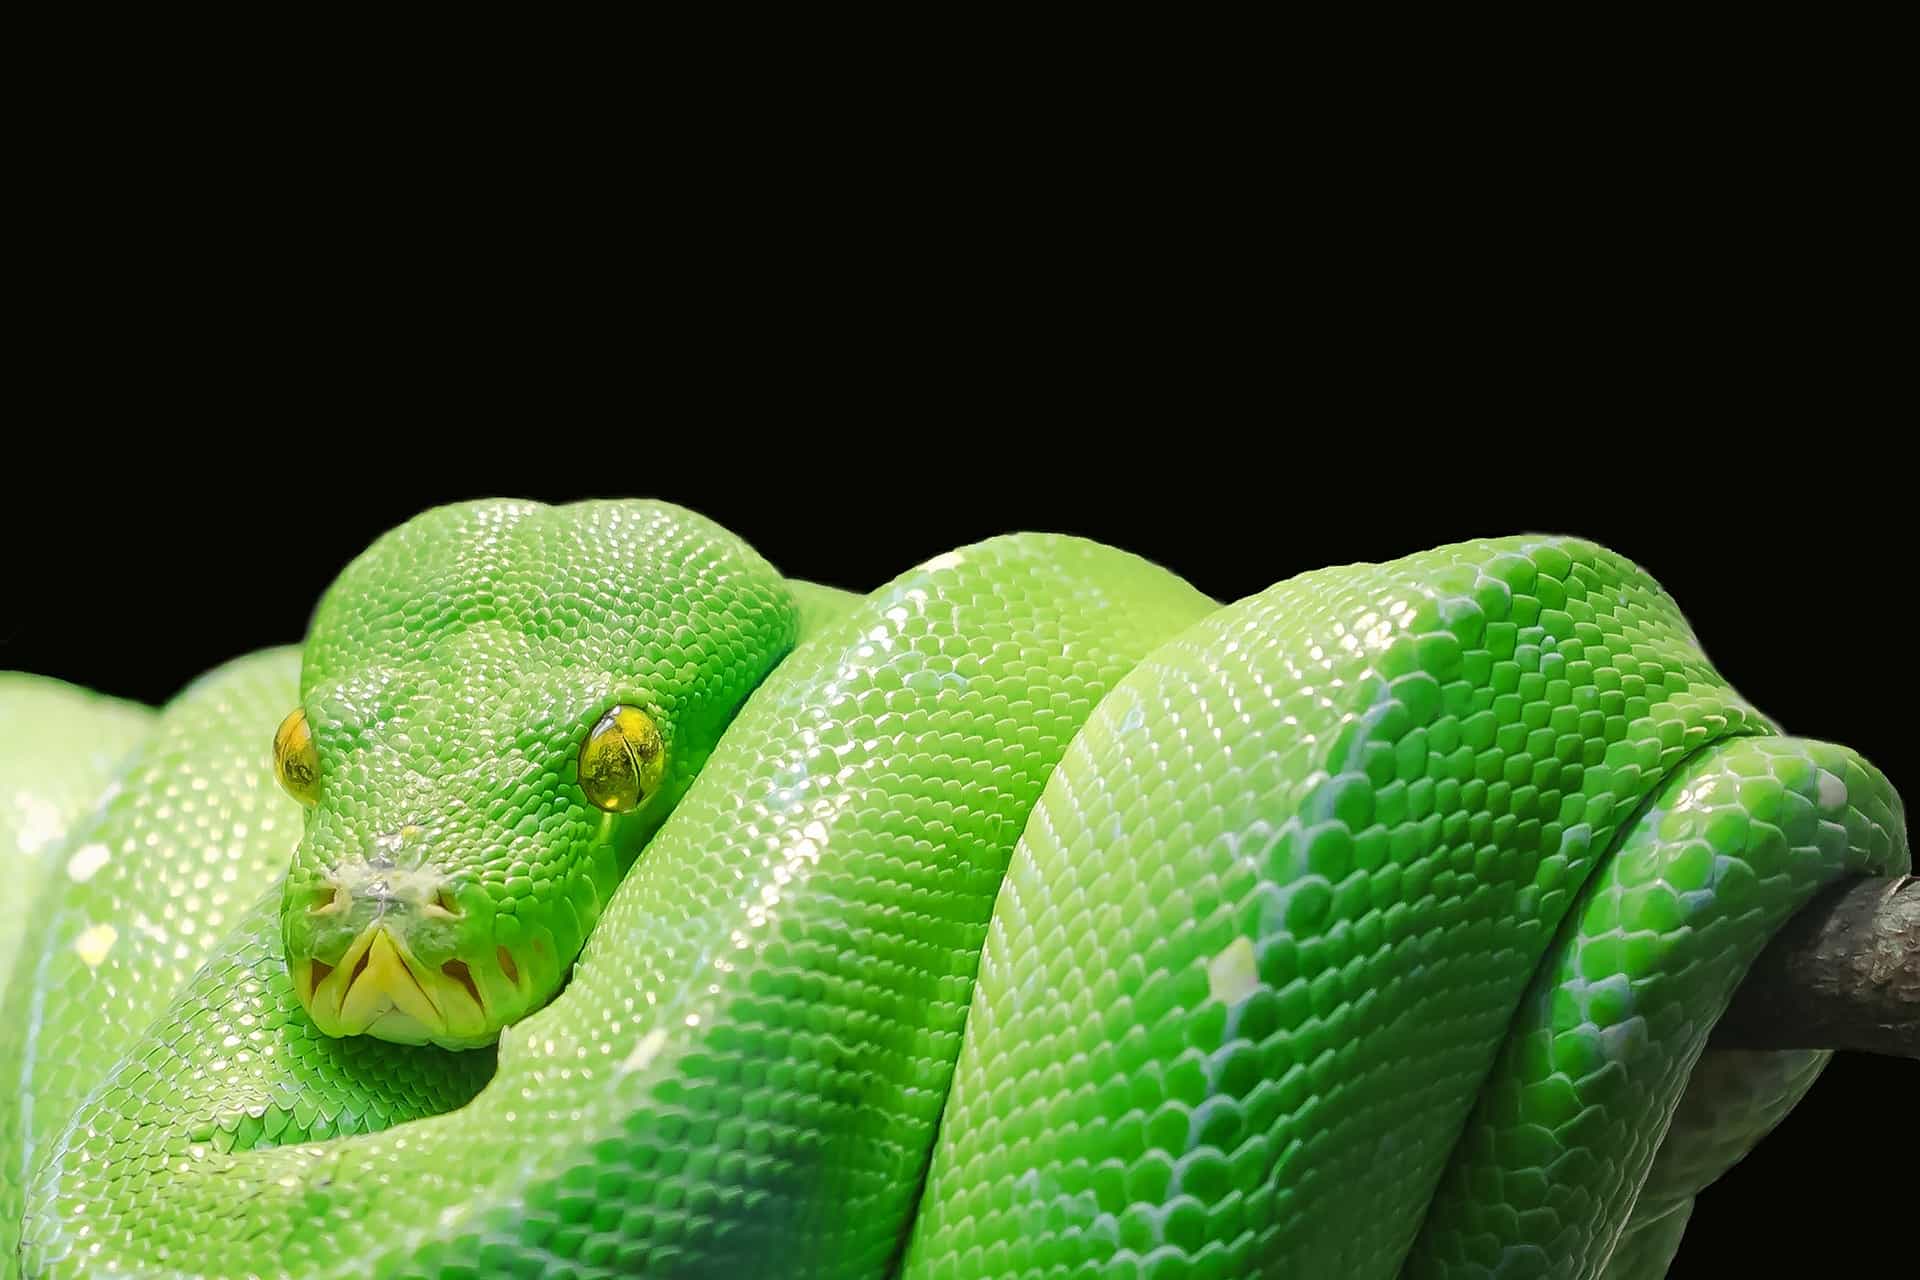 100 Snake Facts That Will Swallow You Whole | Facts.net